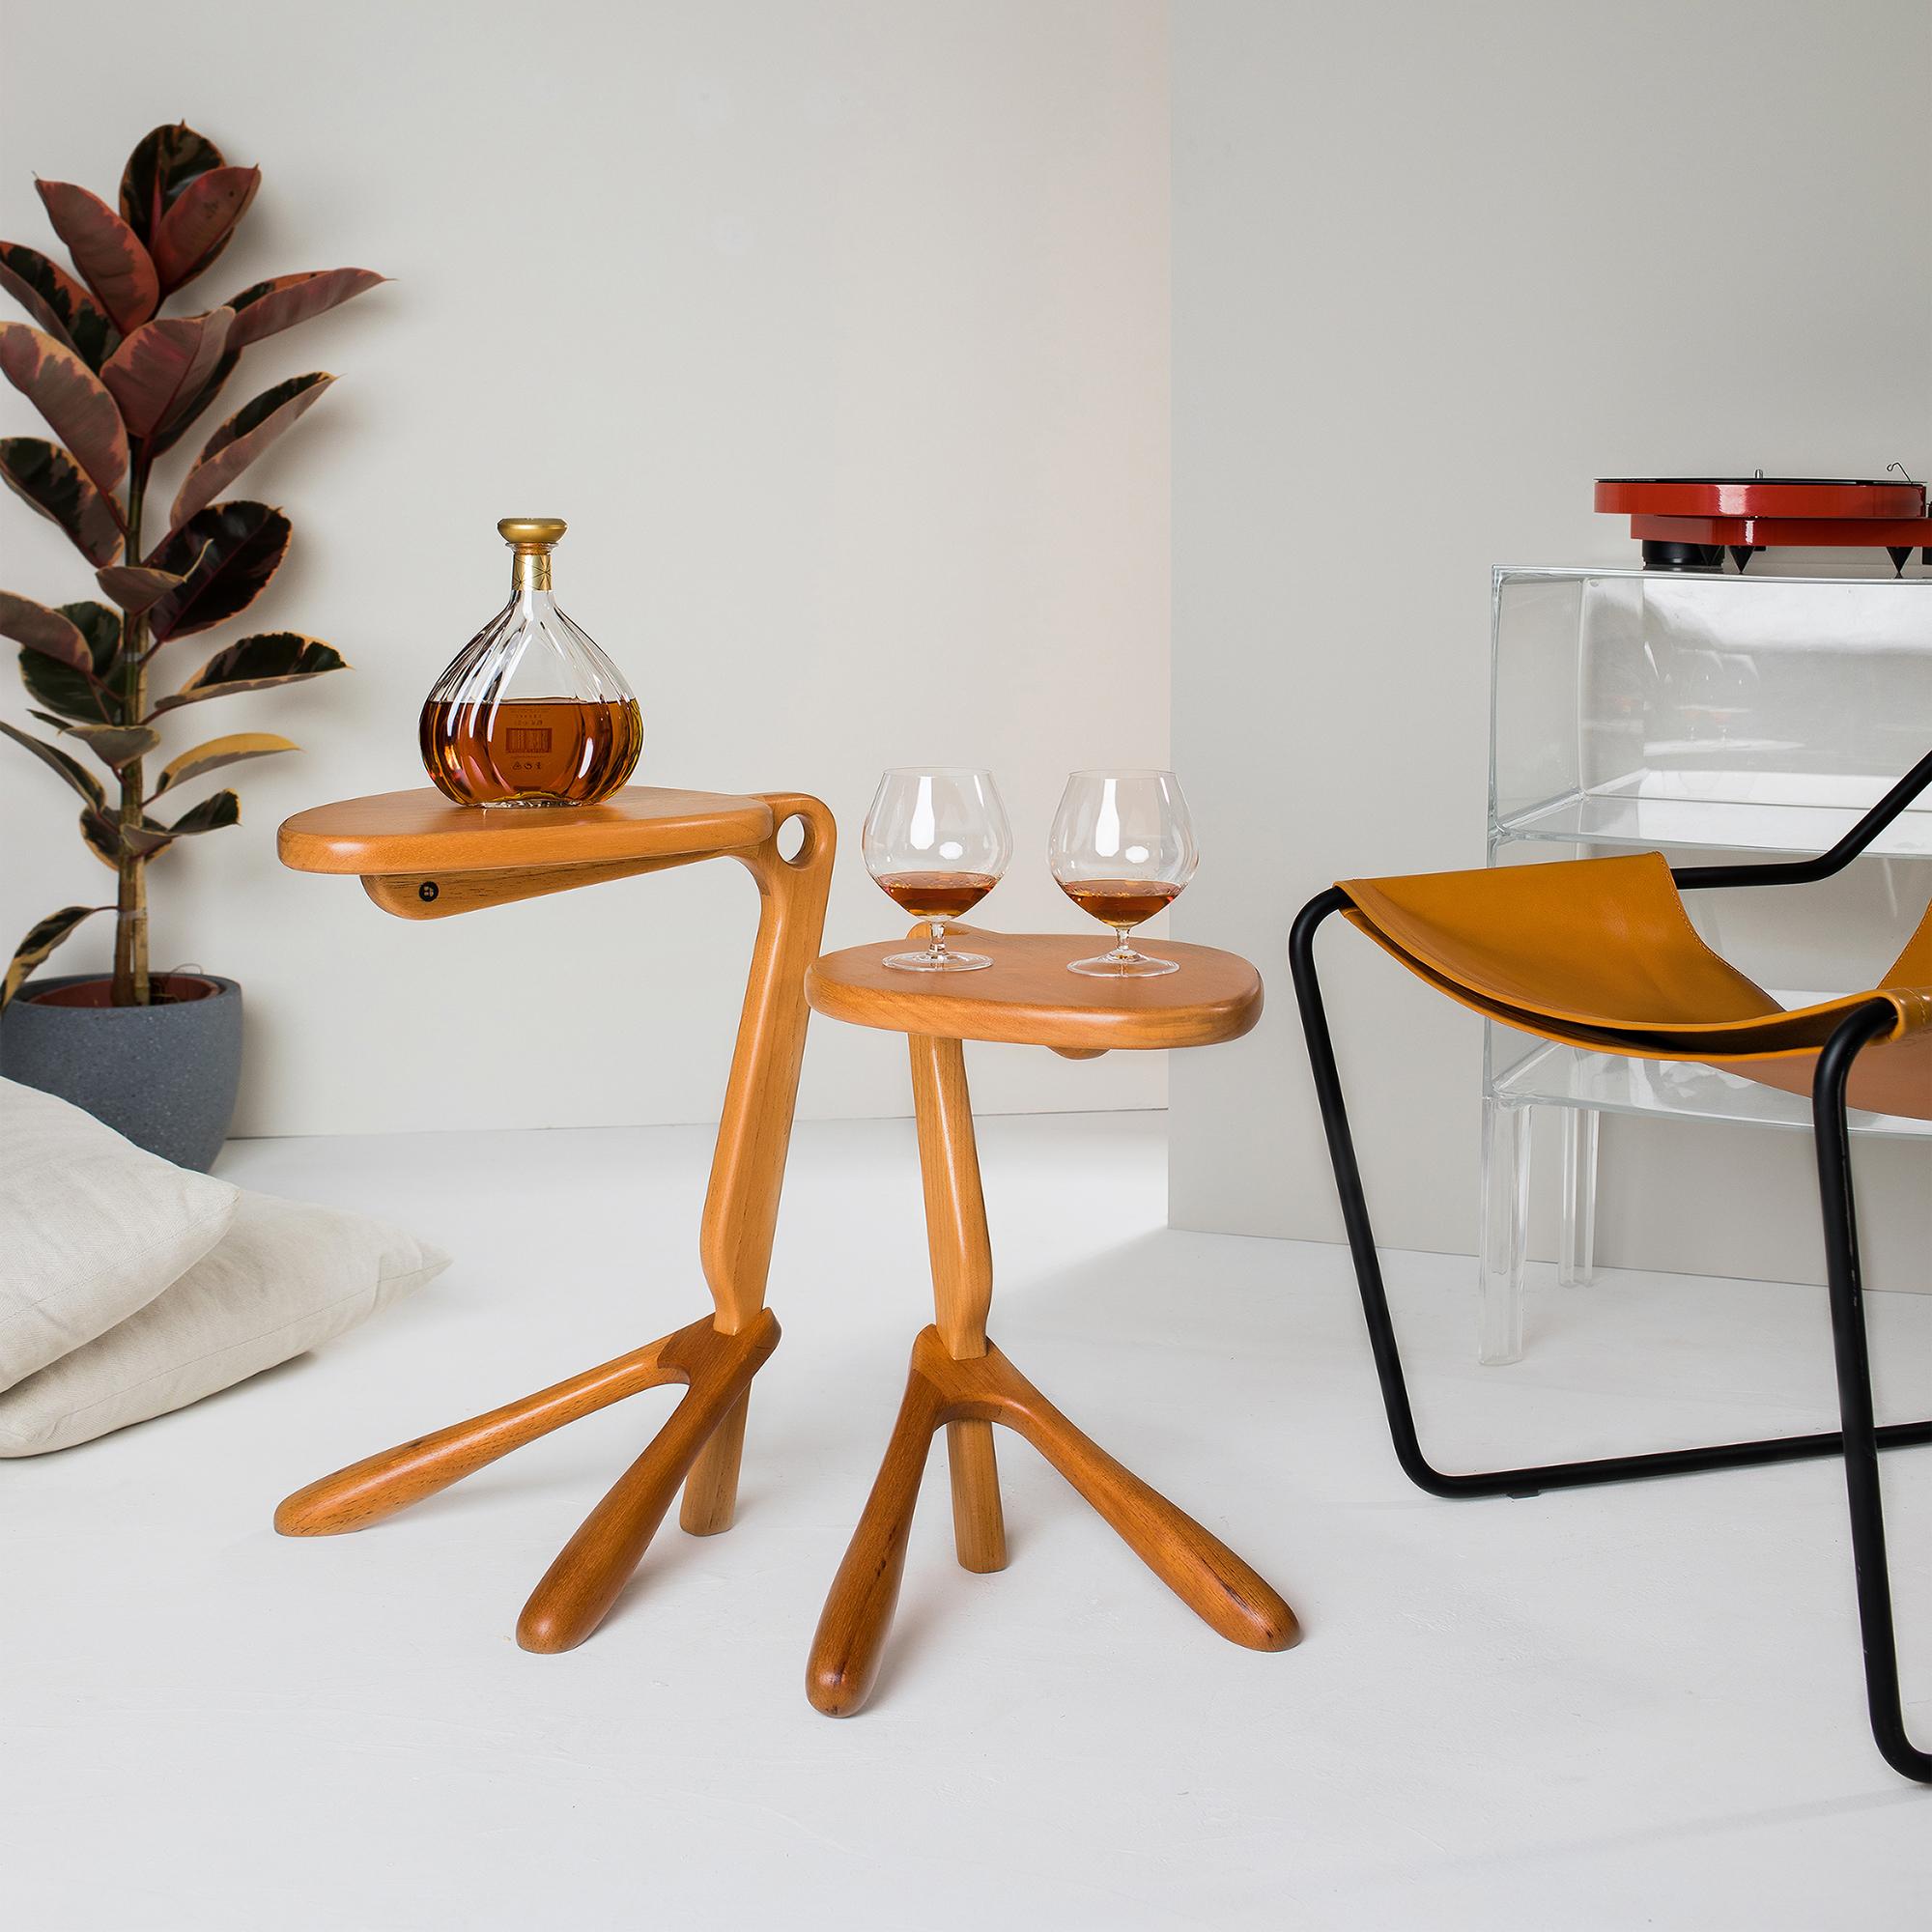 Lightweight and available in two sizes, with varying heights and tabletop designs, Broto side tables can be easily transported between spaces, accommodating a variety of usage needs. Whether used together or individually, these side tables add